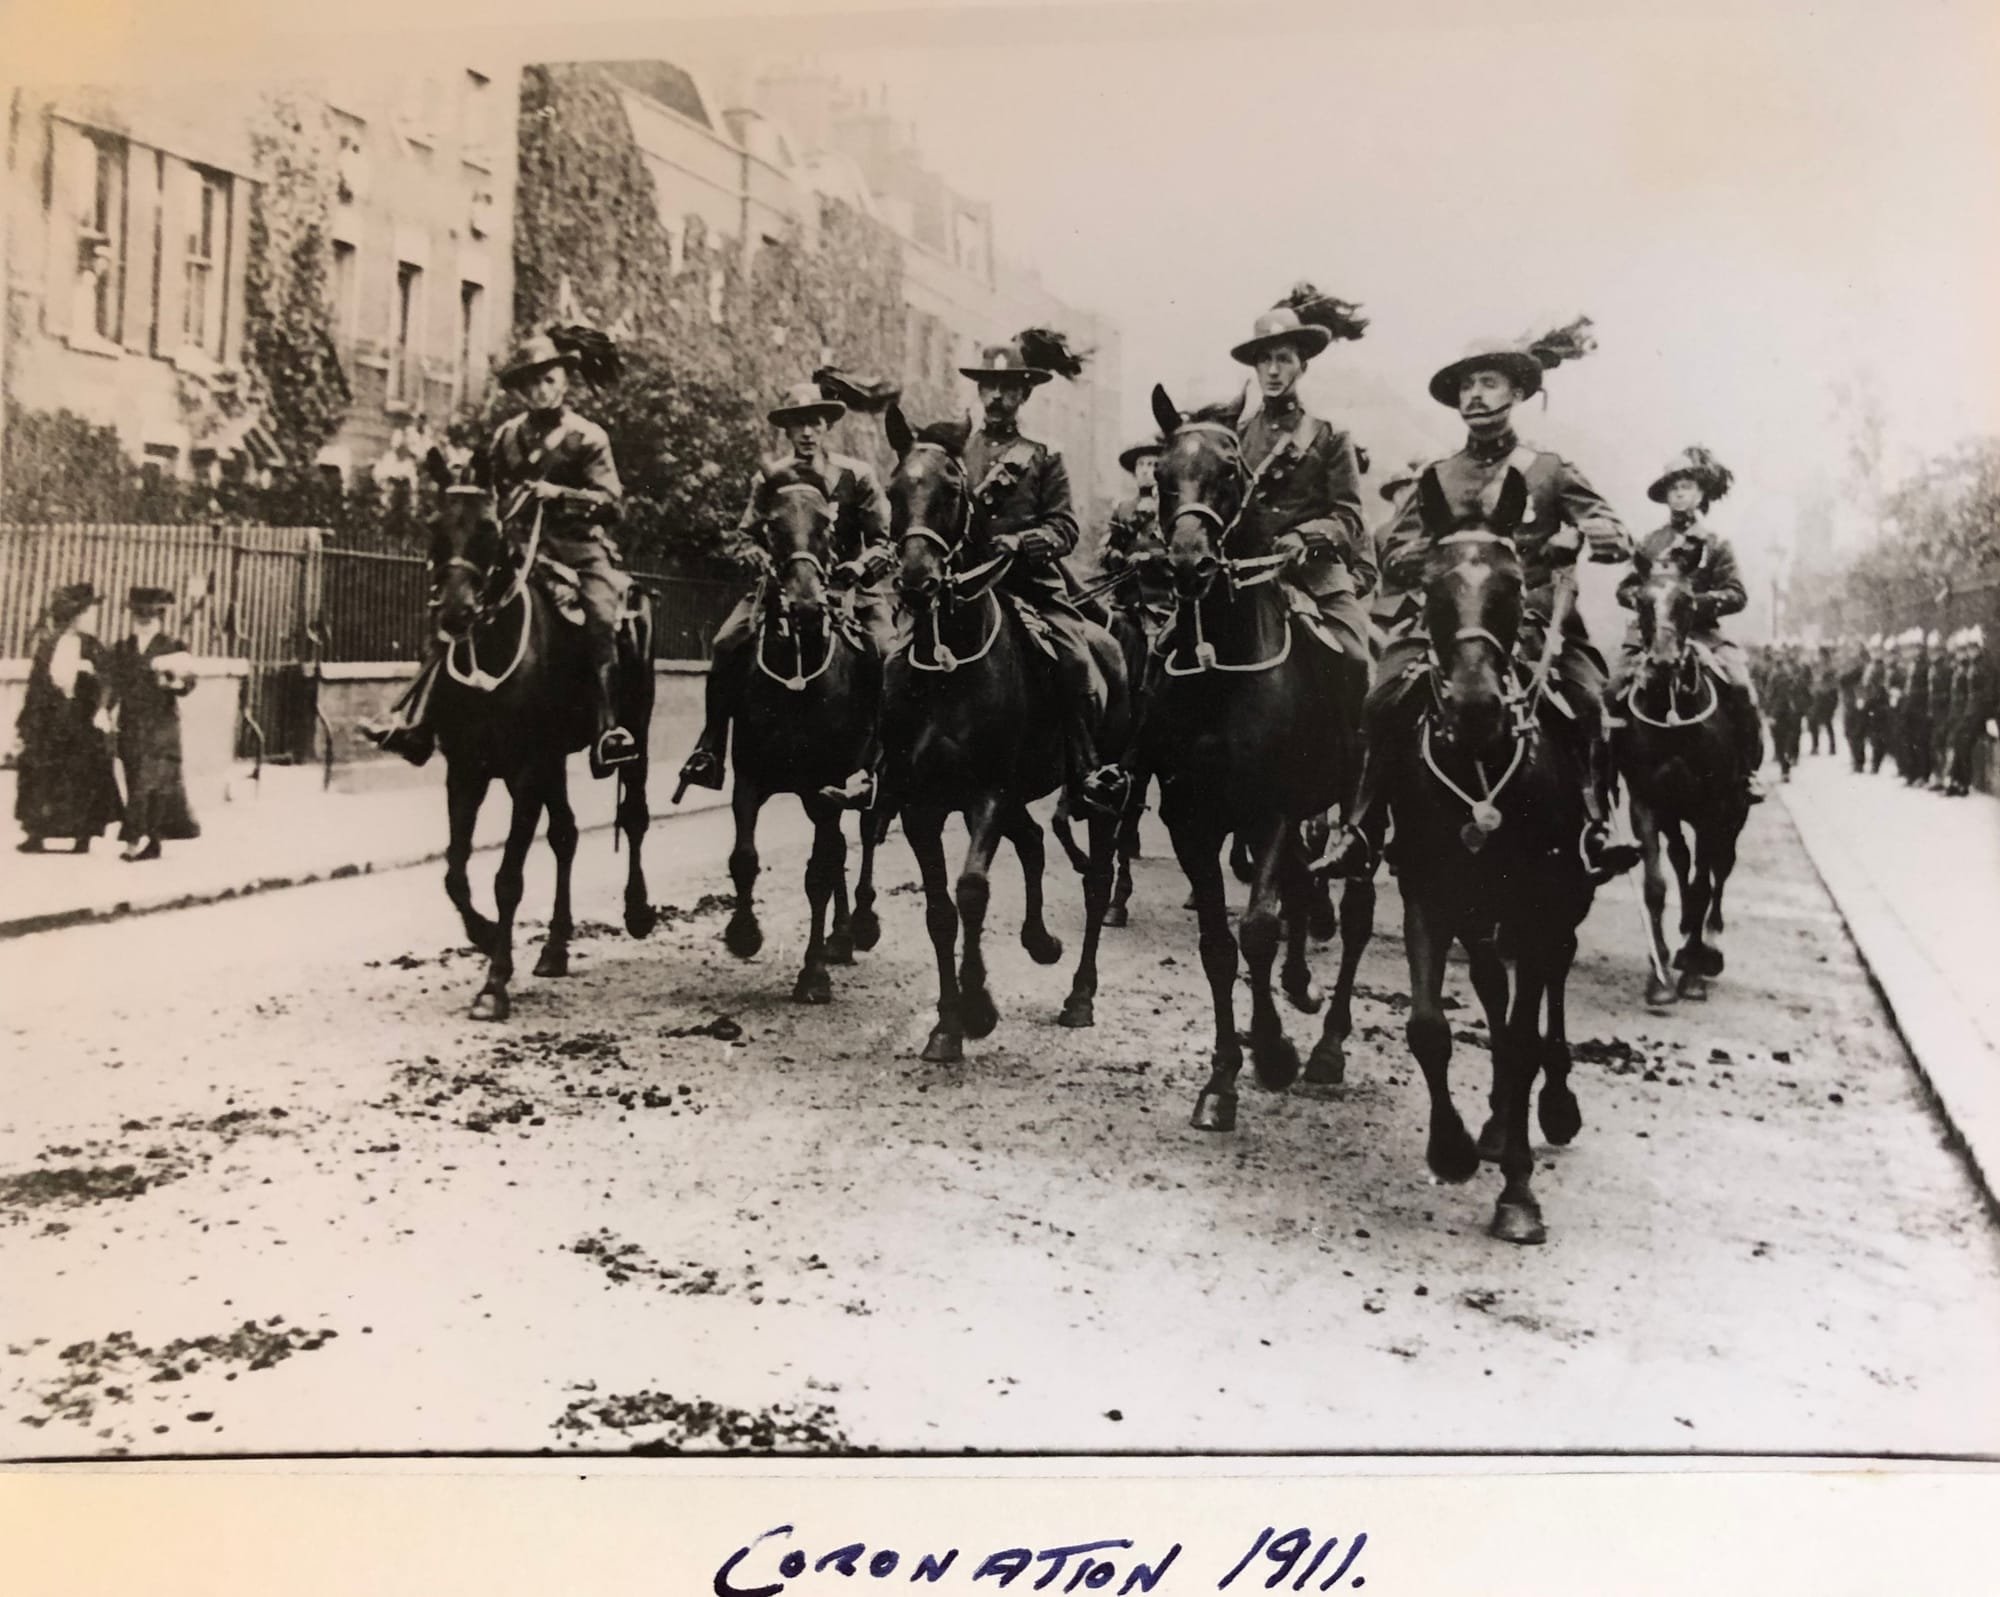 Mounted contingent of the KEH in Full Dress uniform at the 1911 Coronation.